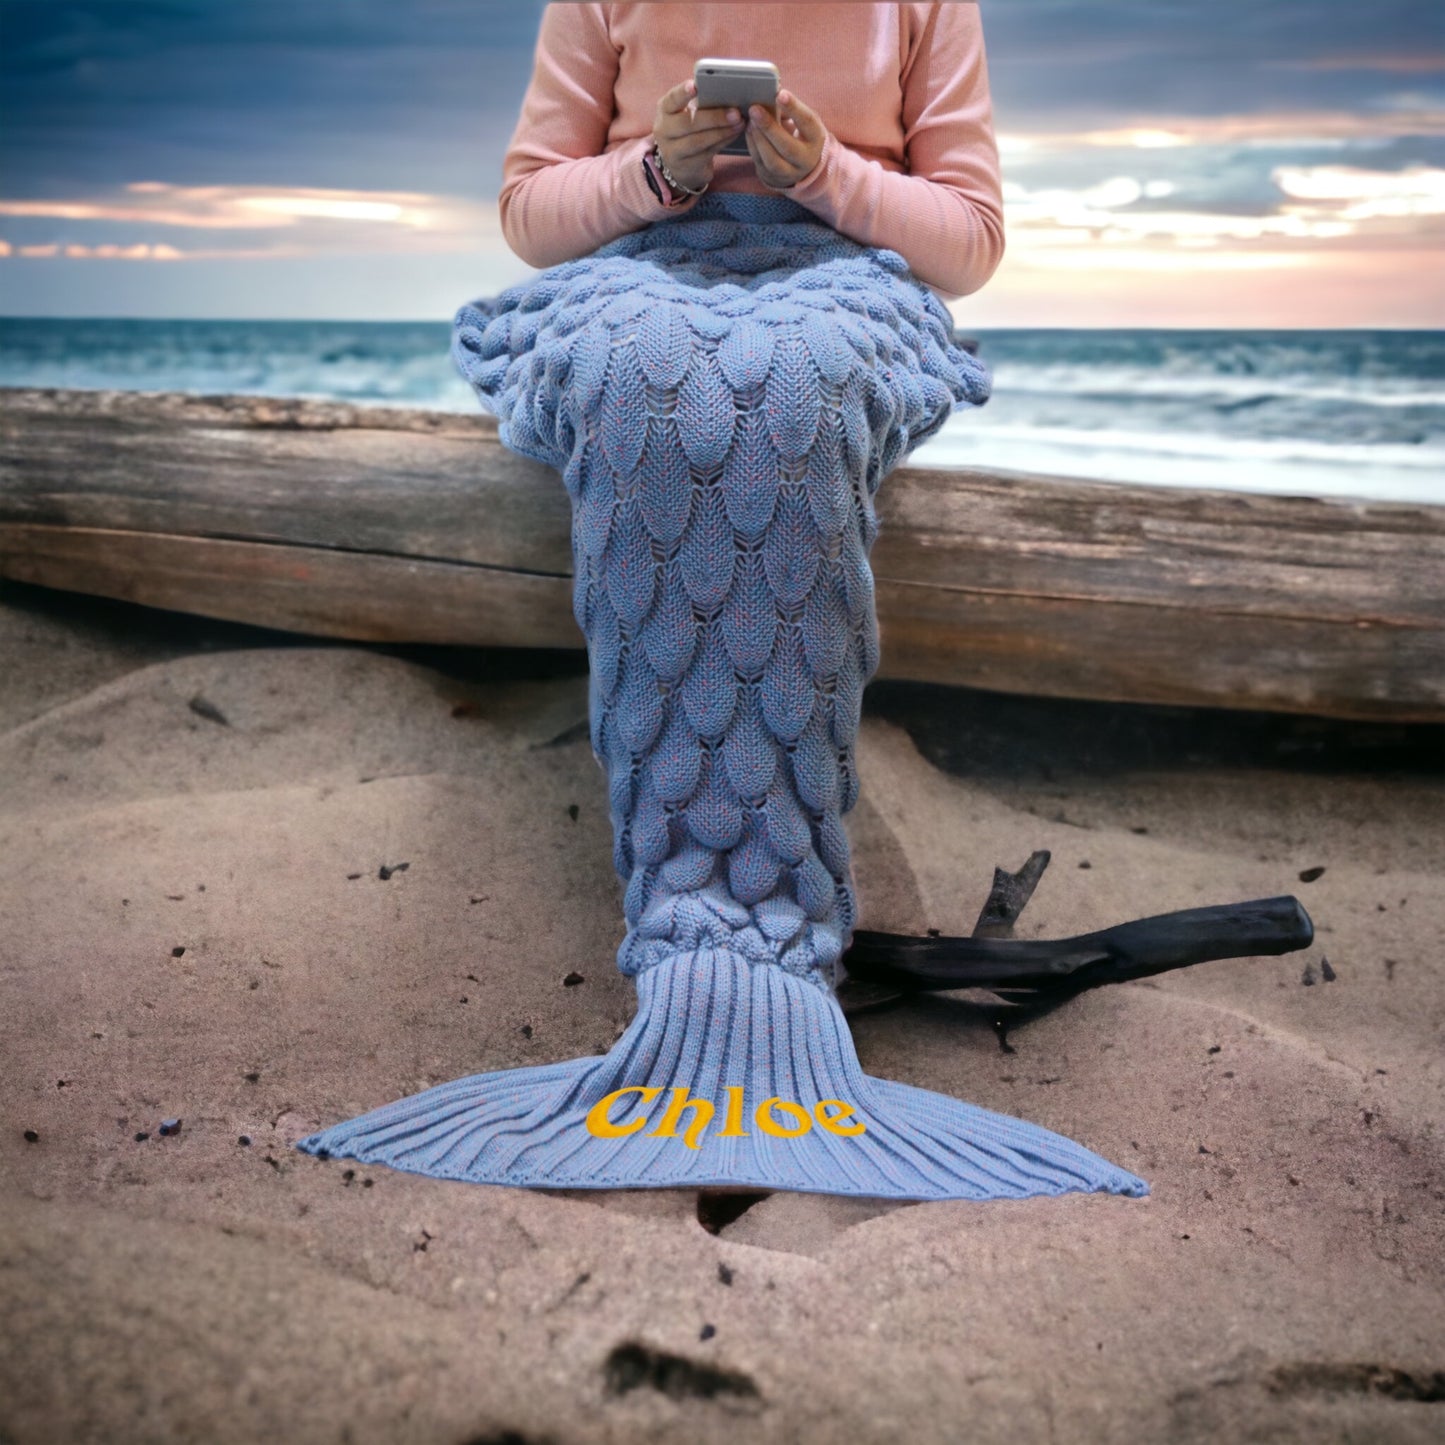 Personalized Mermaid Tail Shape Blanket - Ocean Blue" Description: "Close-up of a cozy mermaid tail blanket in a beautiful ocean blue color, ready to be personalized with a name."